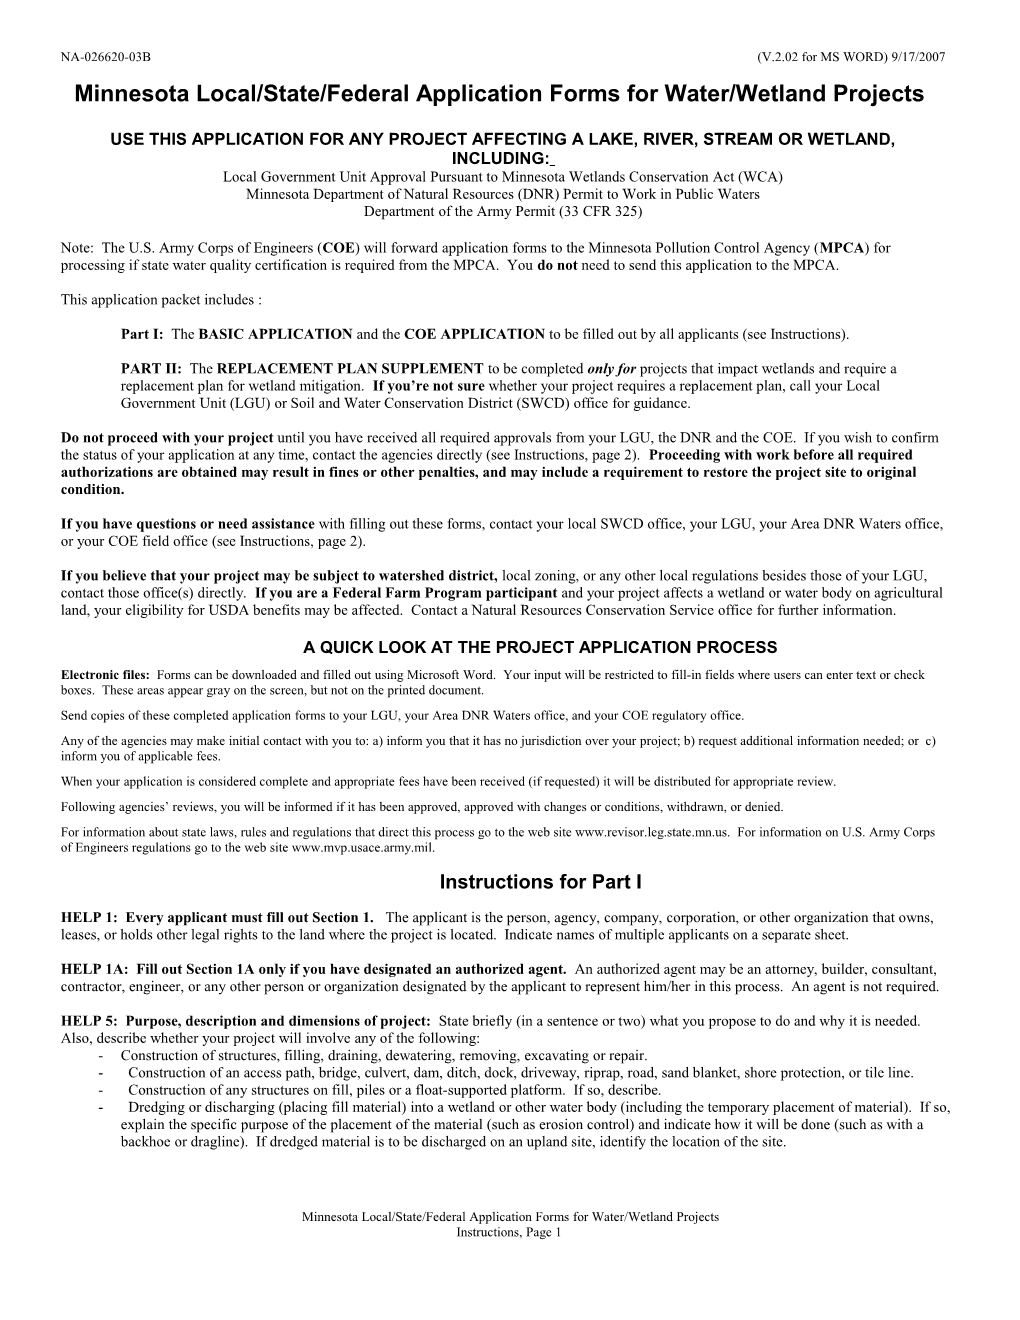 Minnesota Local/State/Federal Application Forms for Water/Wetland Projects